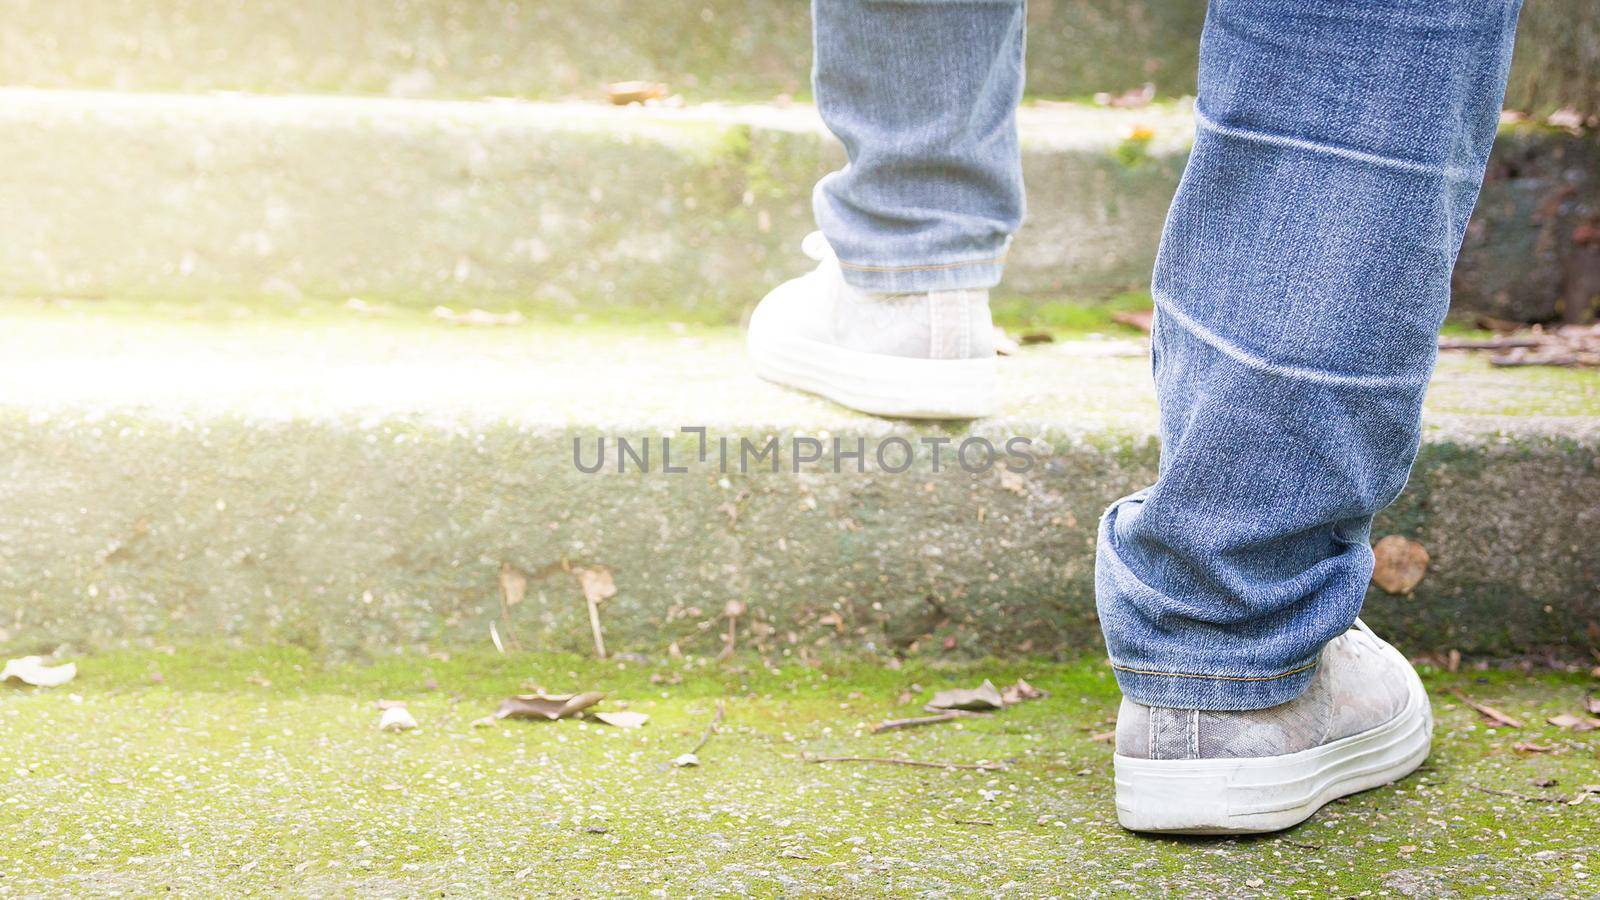 Feet Sneakers And Jeans Walking On Staircase Outdoor With Autumn Season Nature On Background Lifestyle Fashion Trendy Style, Walking In The Park Outdoors.